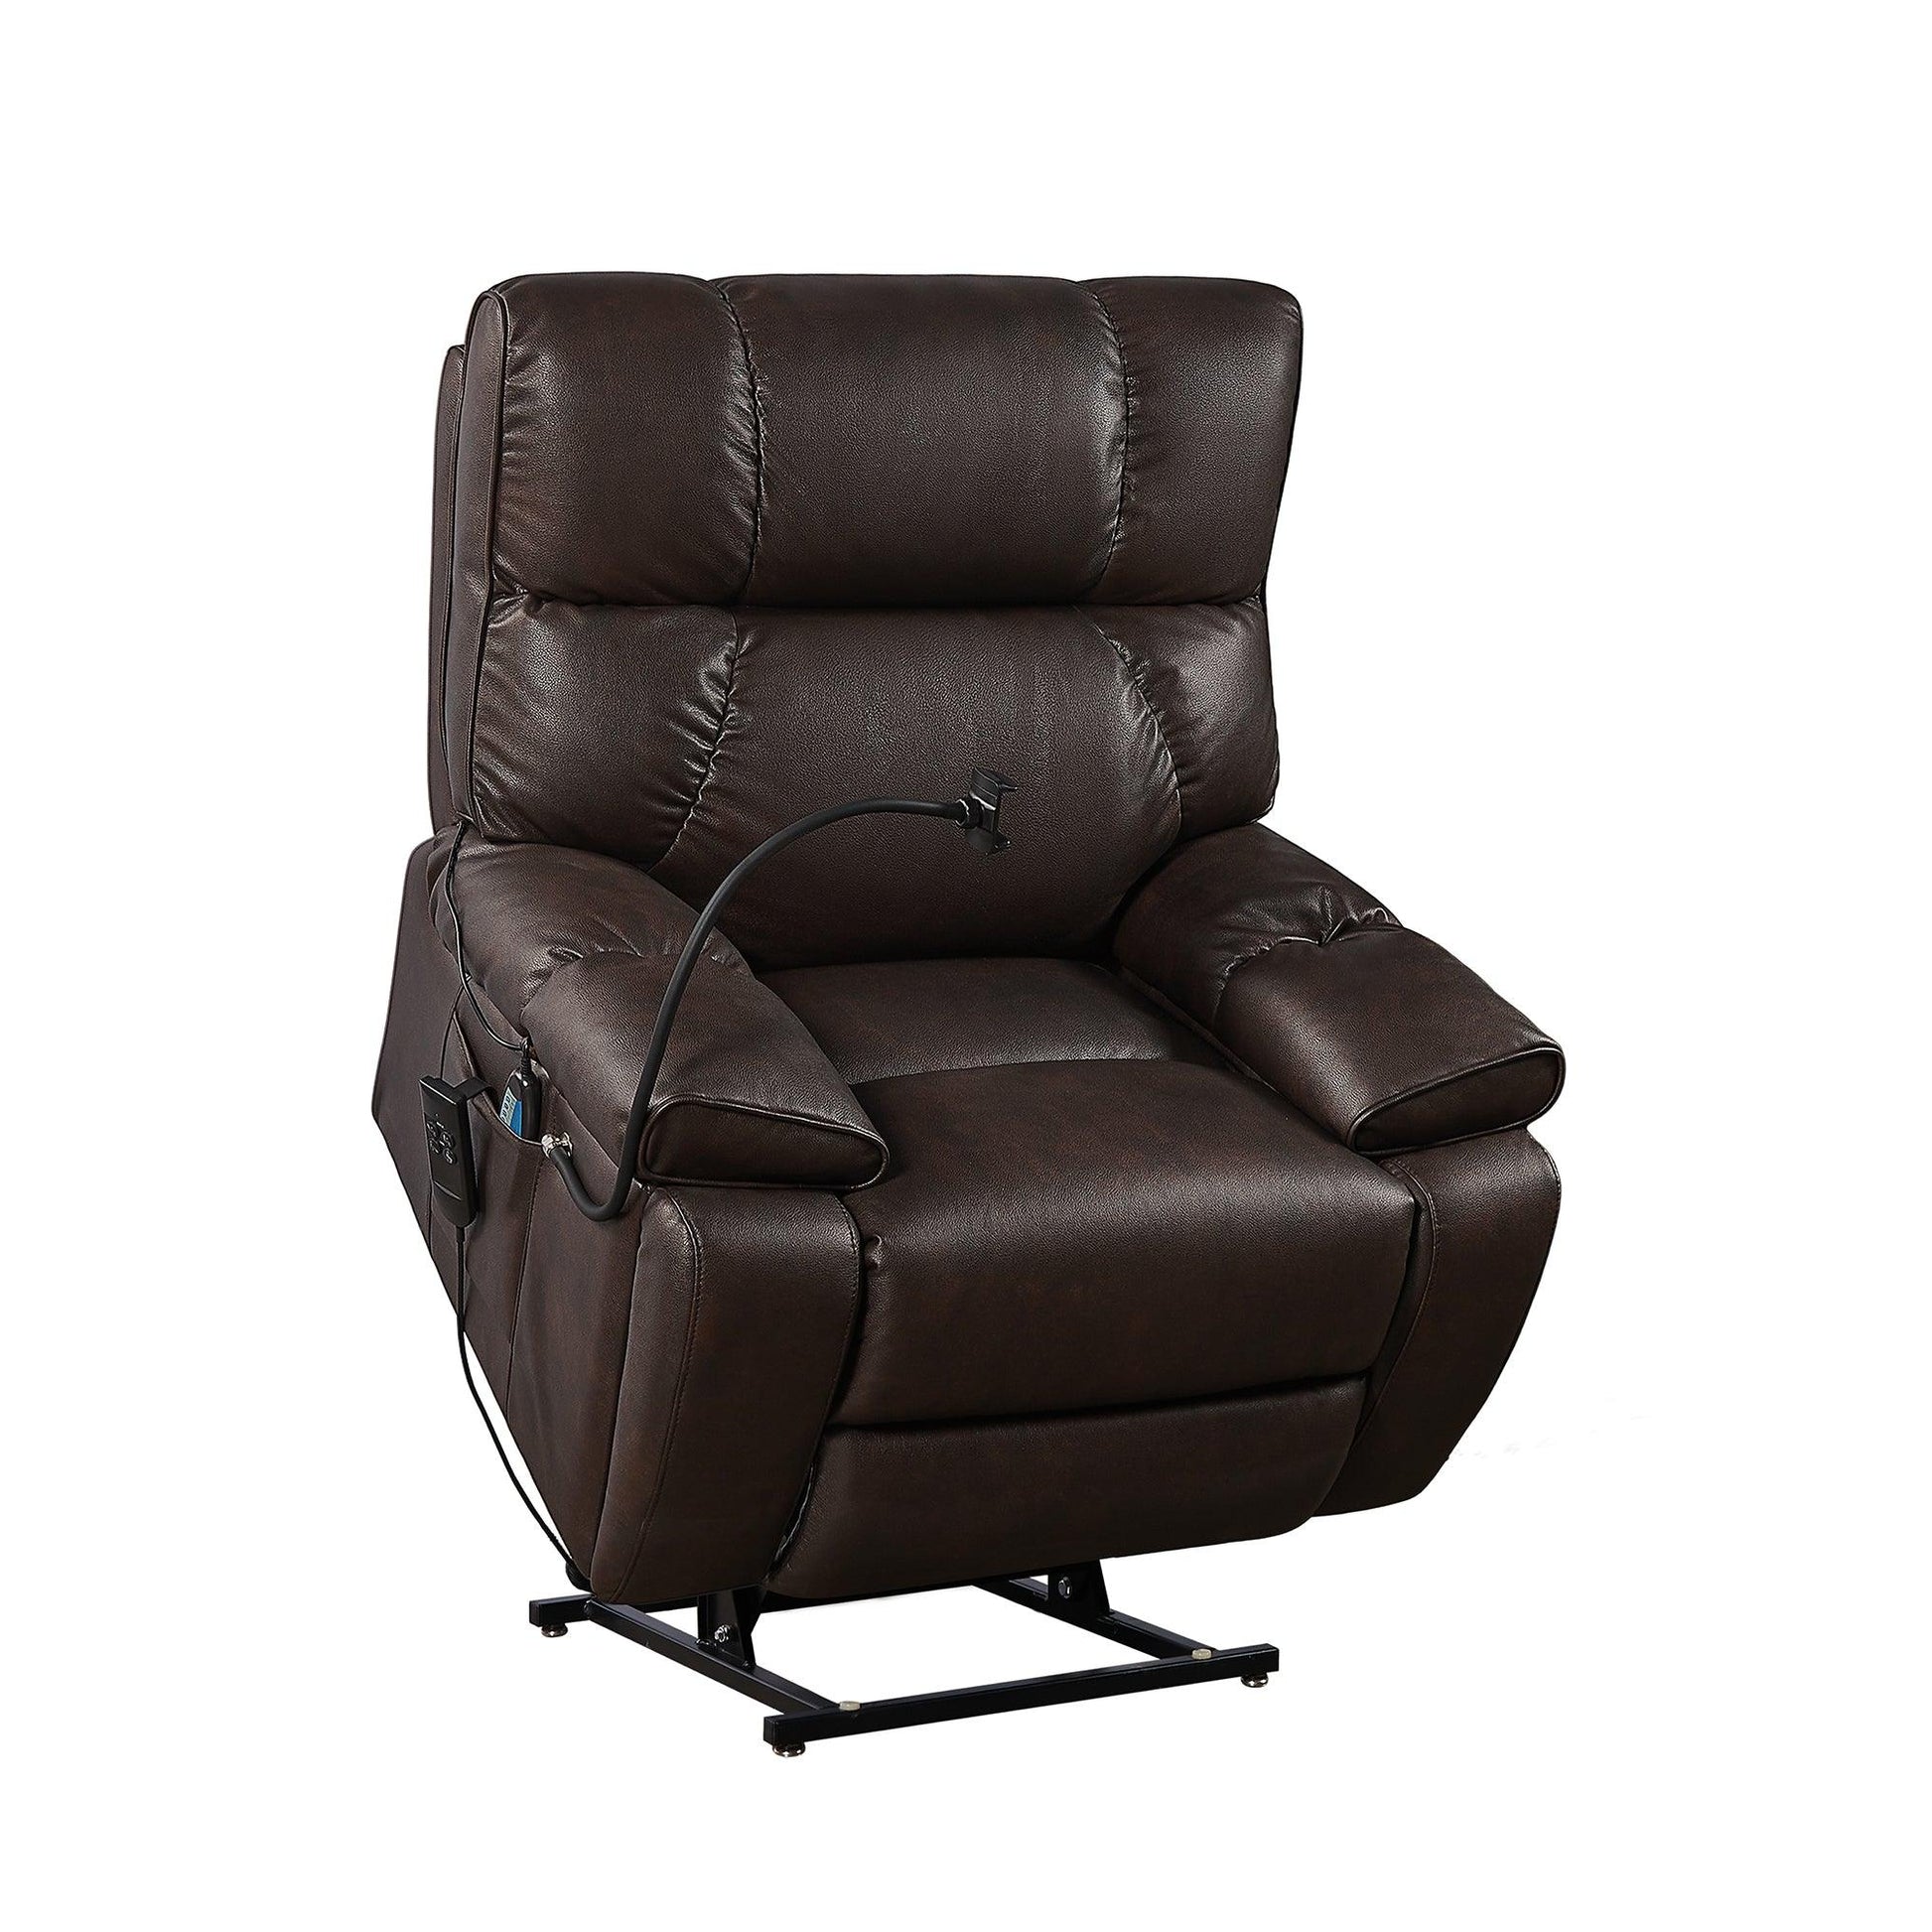 Electric Power Lift Recliner Chair with Massage, Heat, Phone Holder, and Integrated Cup Holders, Brown FredCo